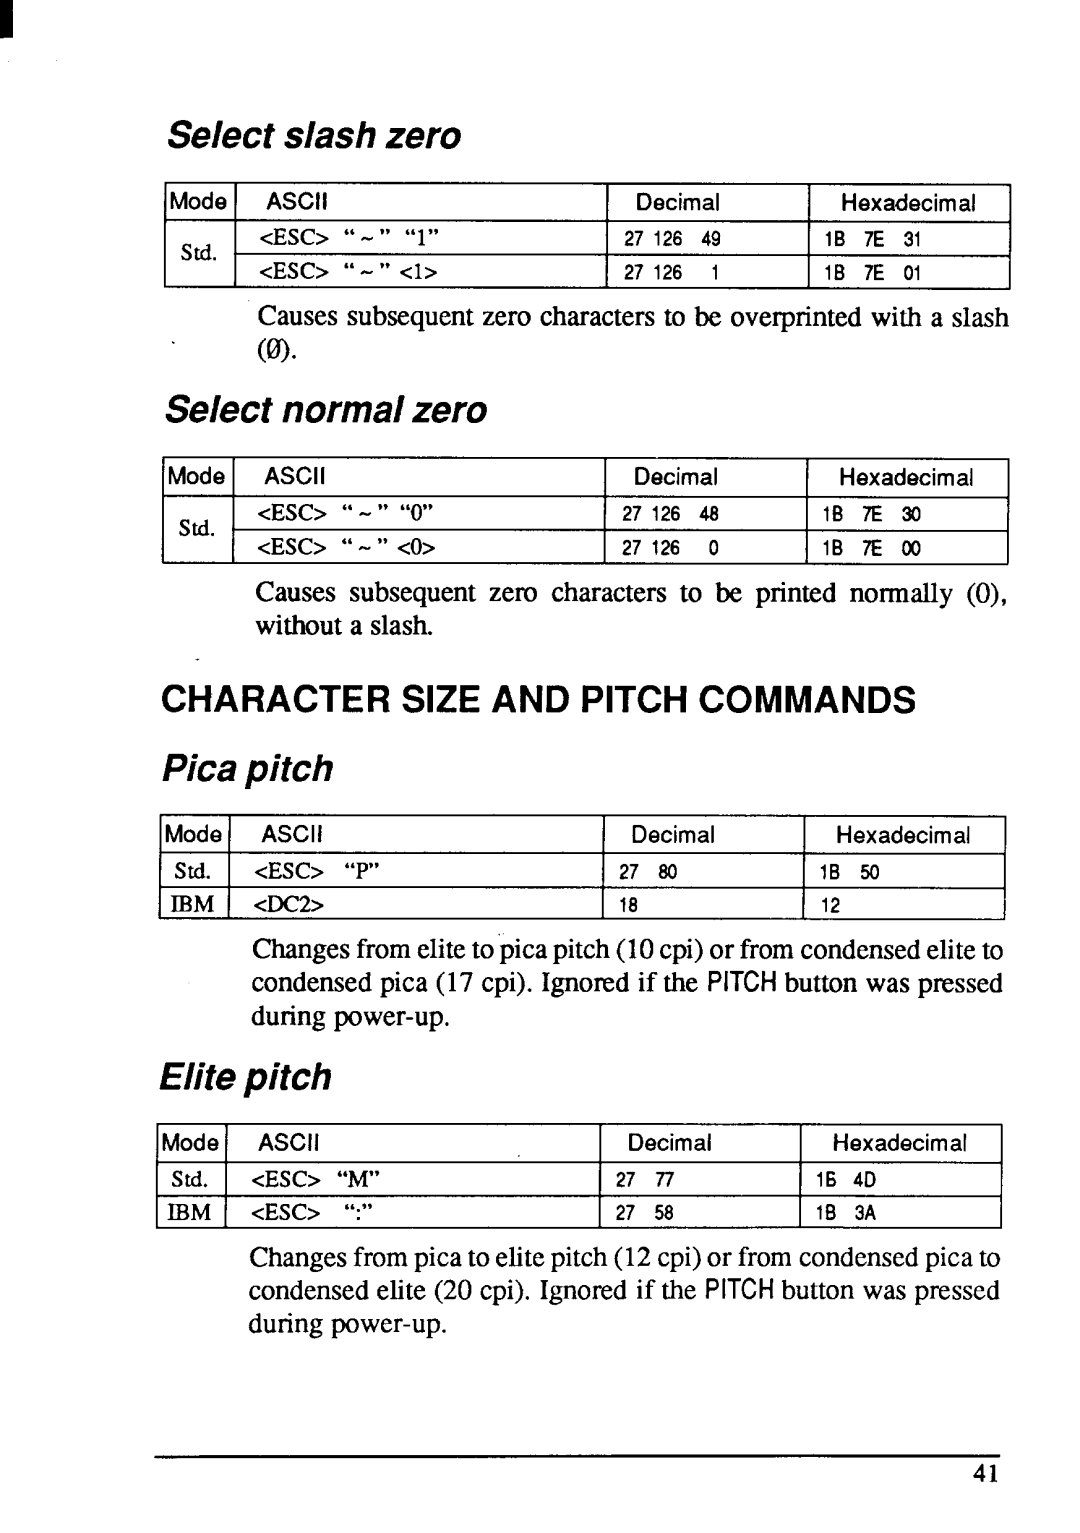 Star Micronics NX-1001 manual Character Size And Pitch Commands 